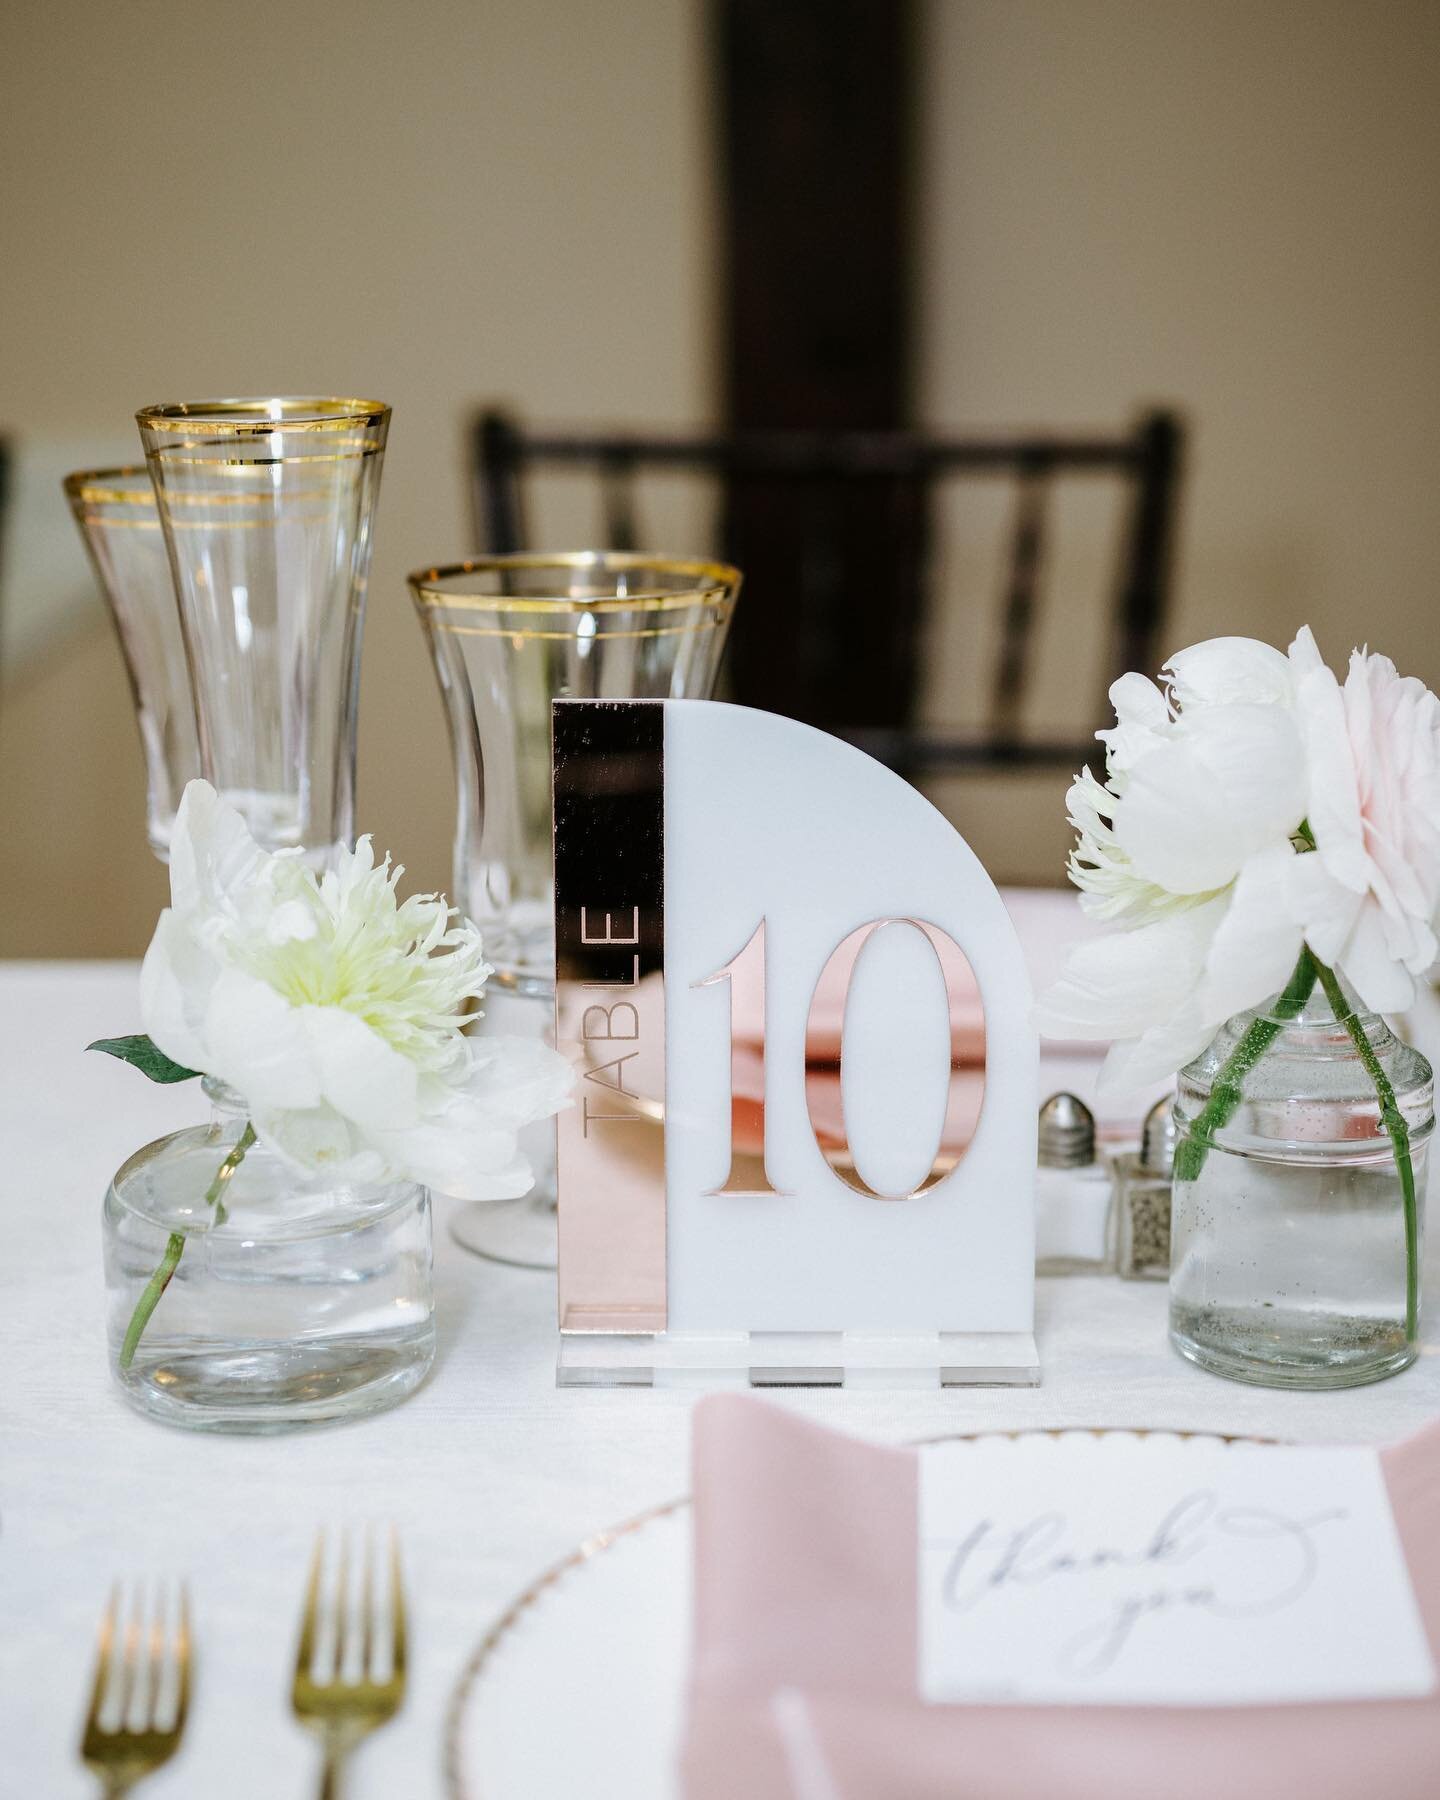 Just your fav&rsquo;acrylic artists over here doing our thang. 
A cute little table number customized for a wedding day. 

White backing with pretty rose gold acrylics that the bride absolutely adored, and I mean how can you not? 

It&rsquo;s really 